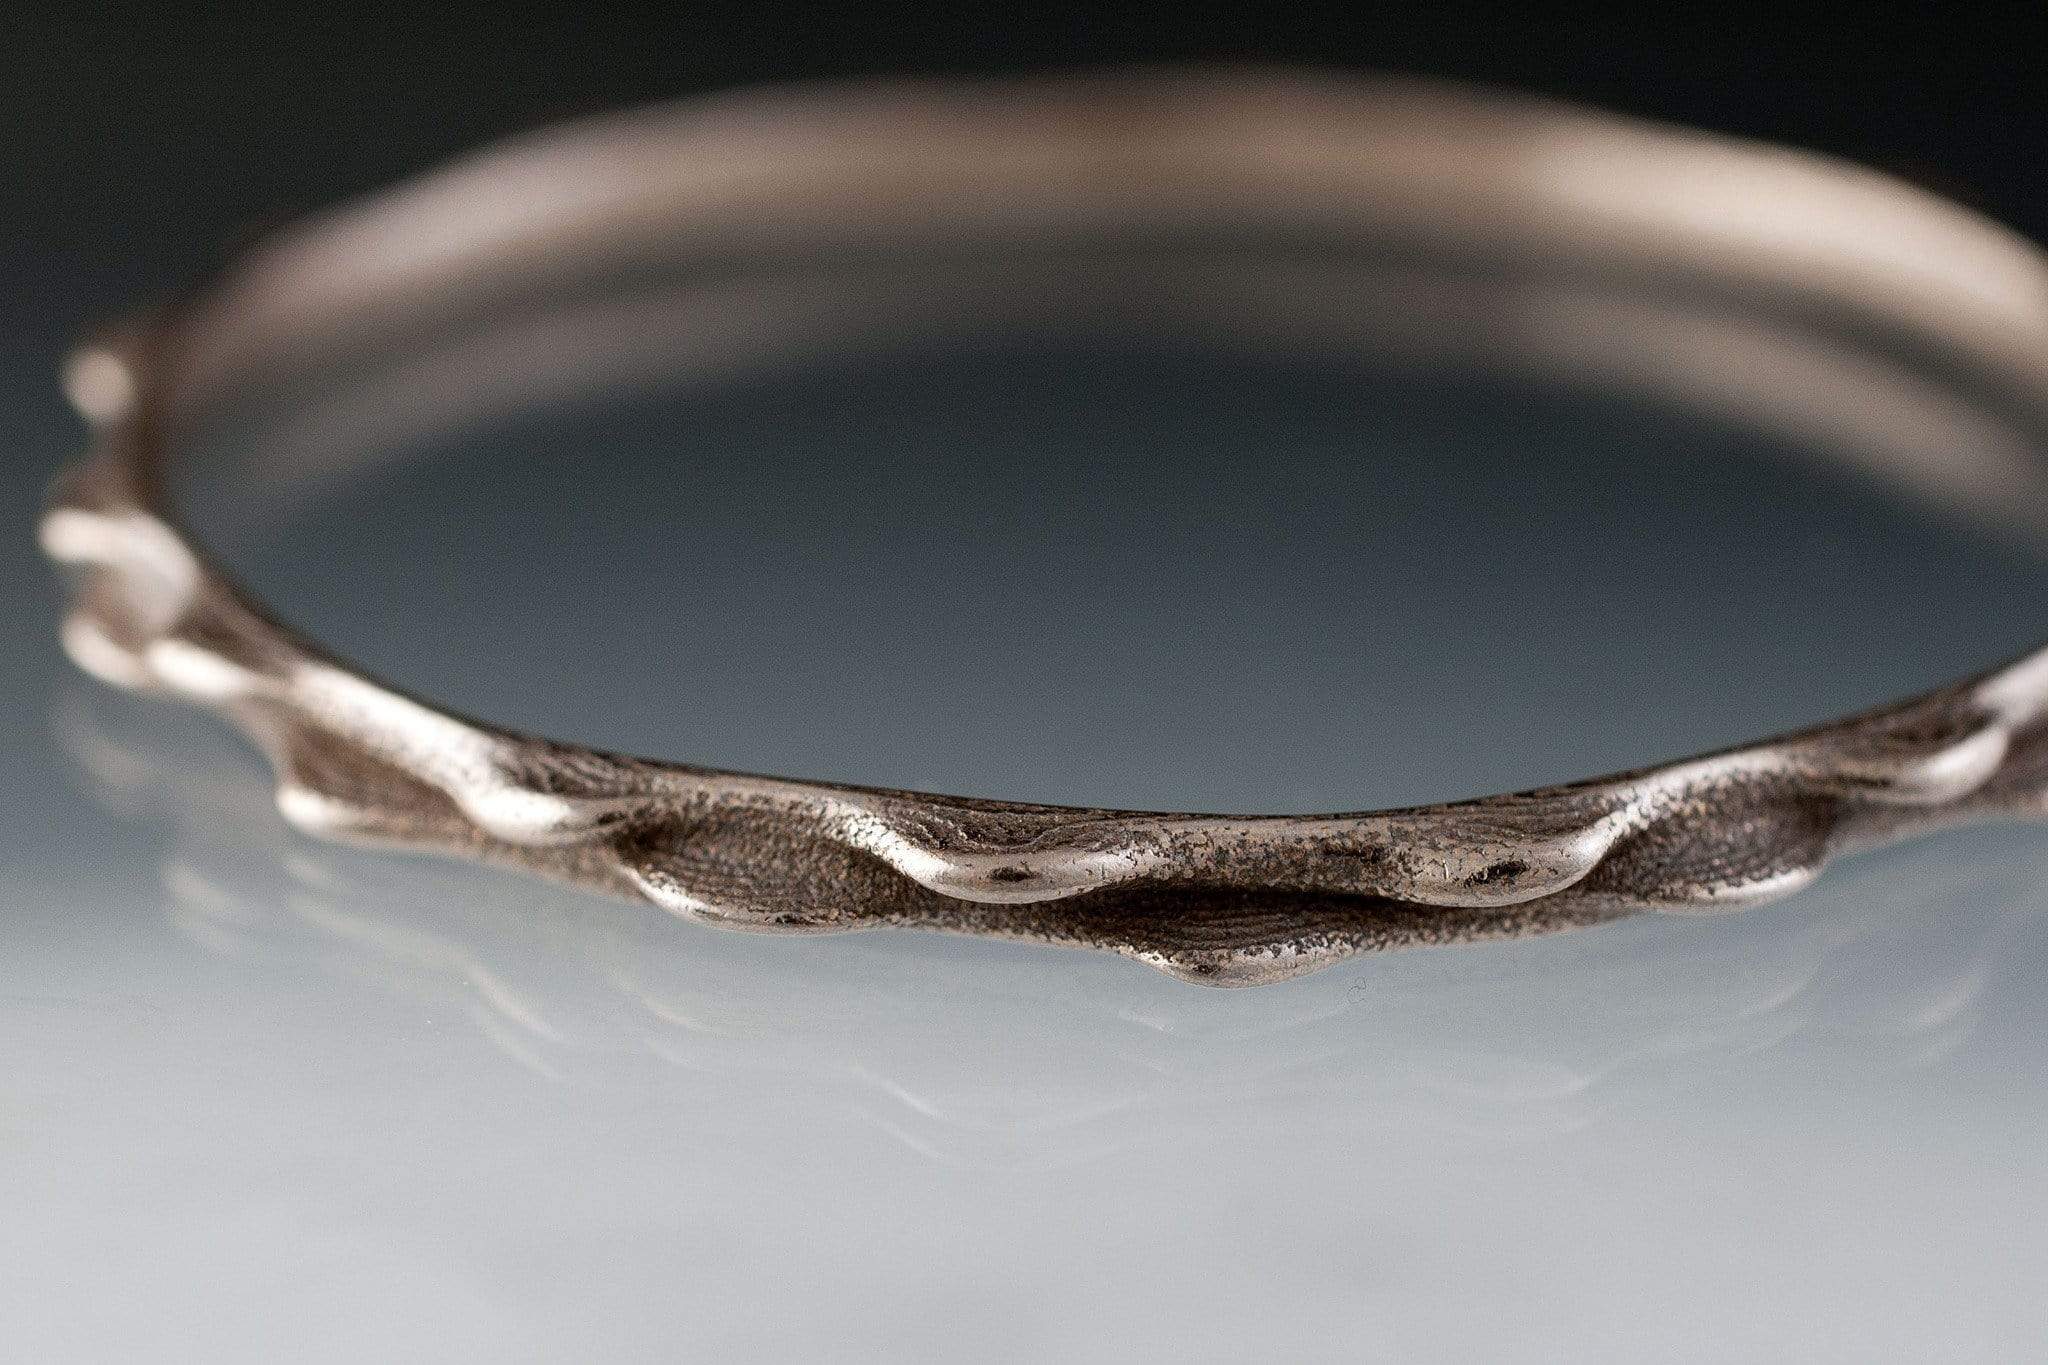 Bumpy Stainless Steel Bracelet Bangle 3D Printed Design, Ready to Ship